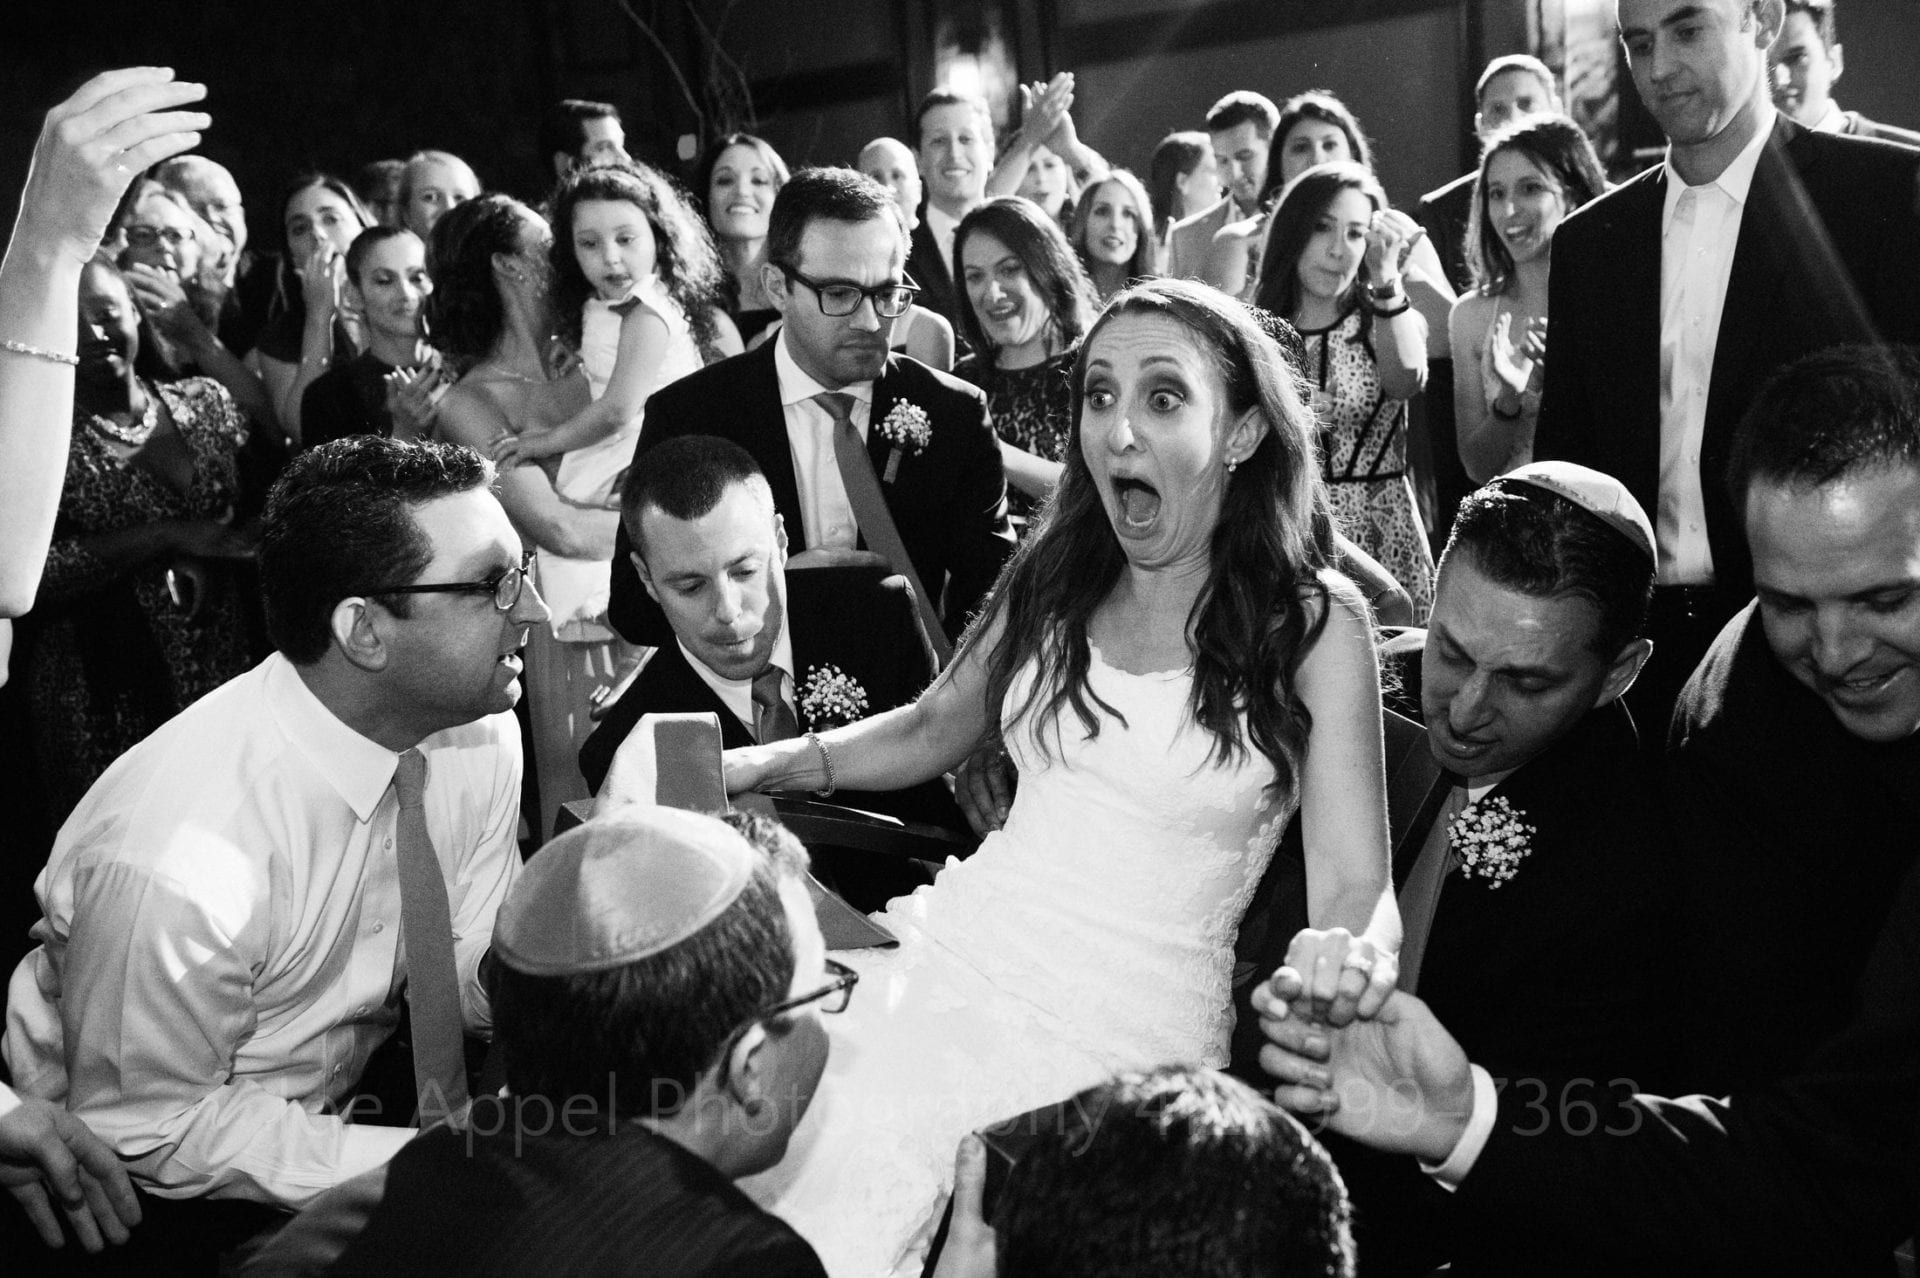 A bride has a look of shocked surprise on her face as she is lifted in a chair by a group of men.